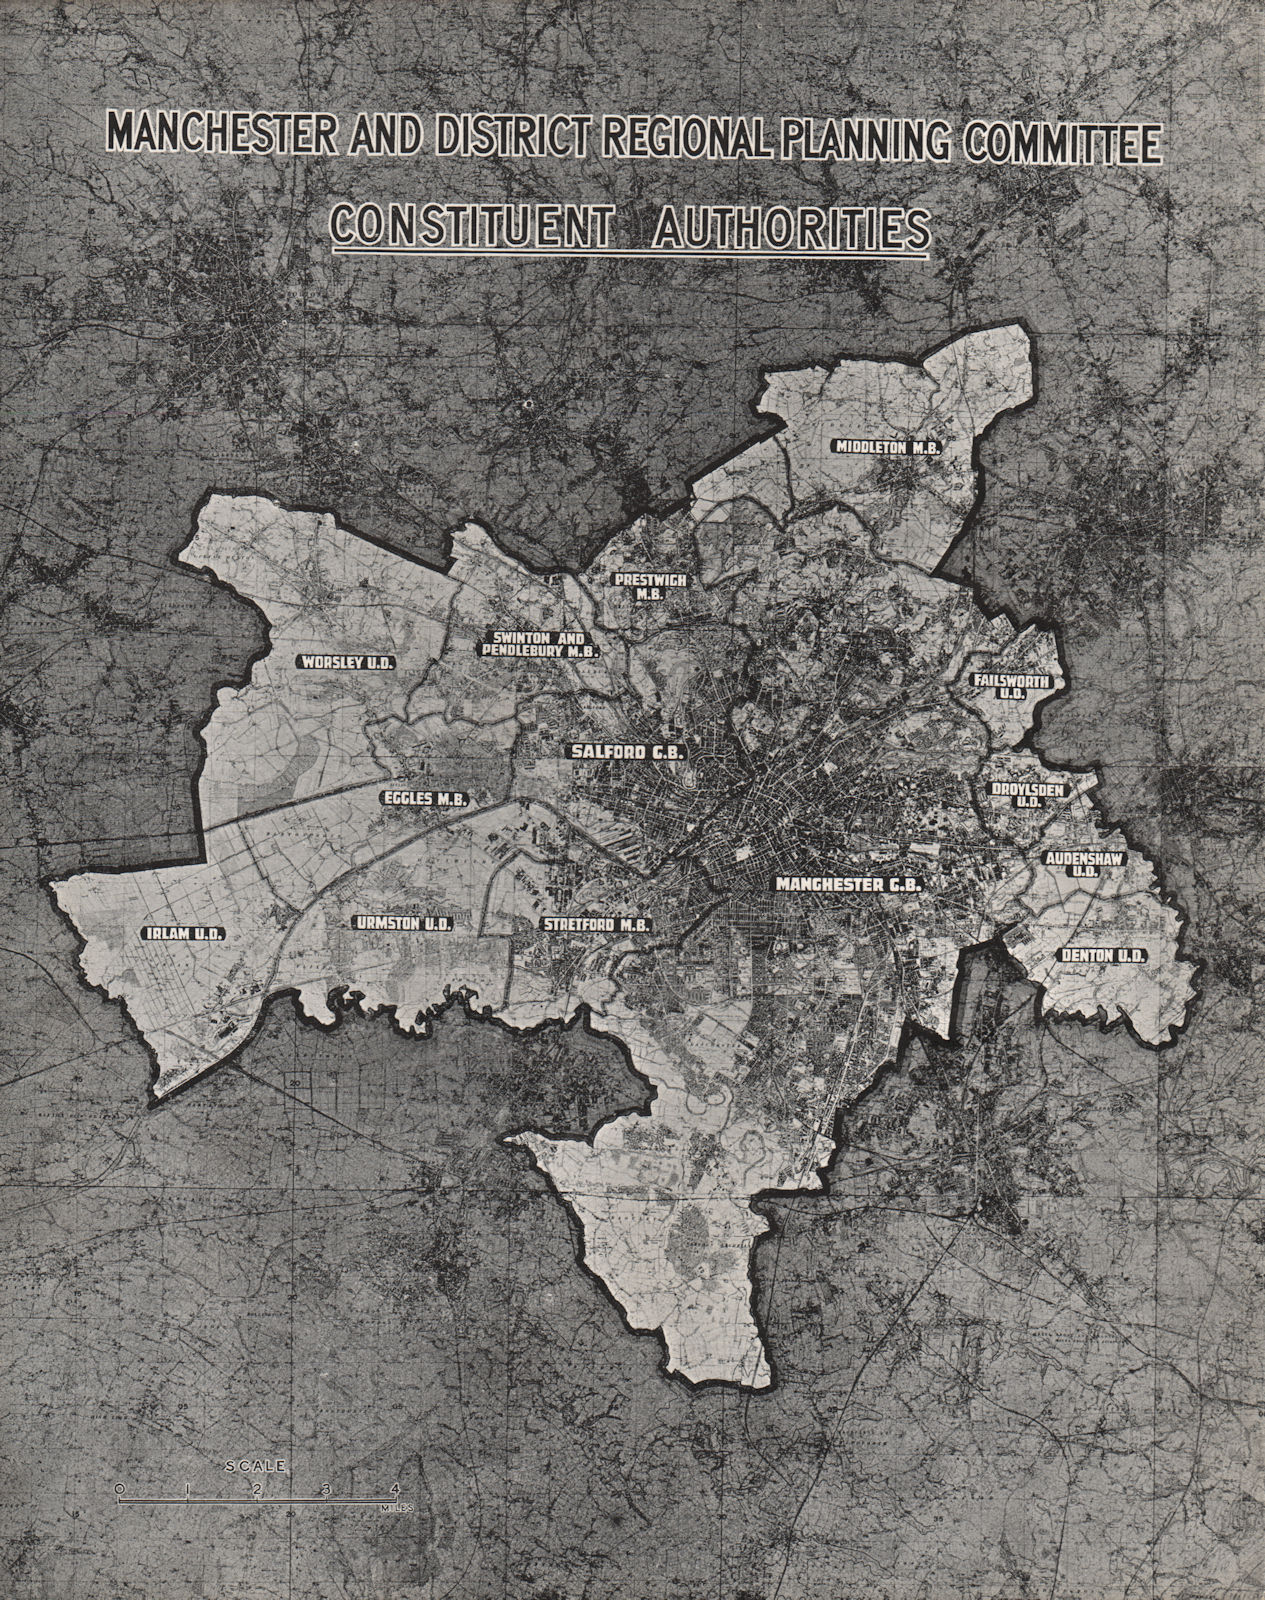 Associate Product MANCHESTER PLAN 1945. Constituent Authorities 1945 old vintage map chart